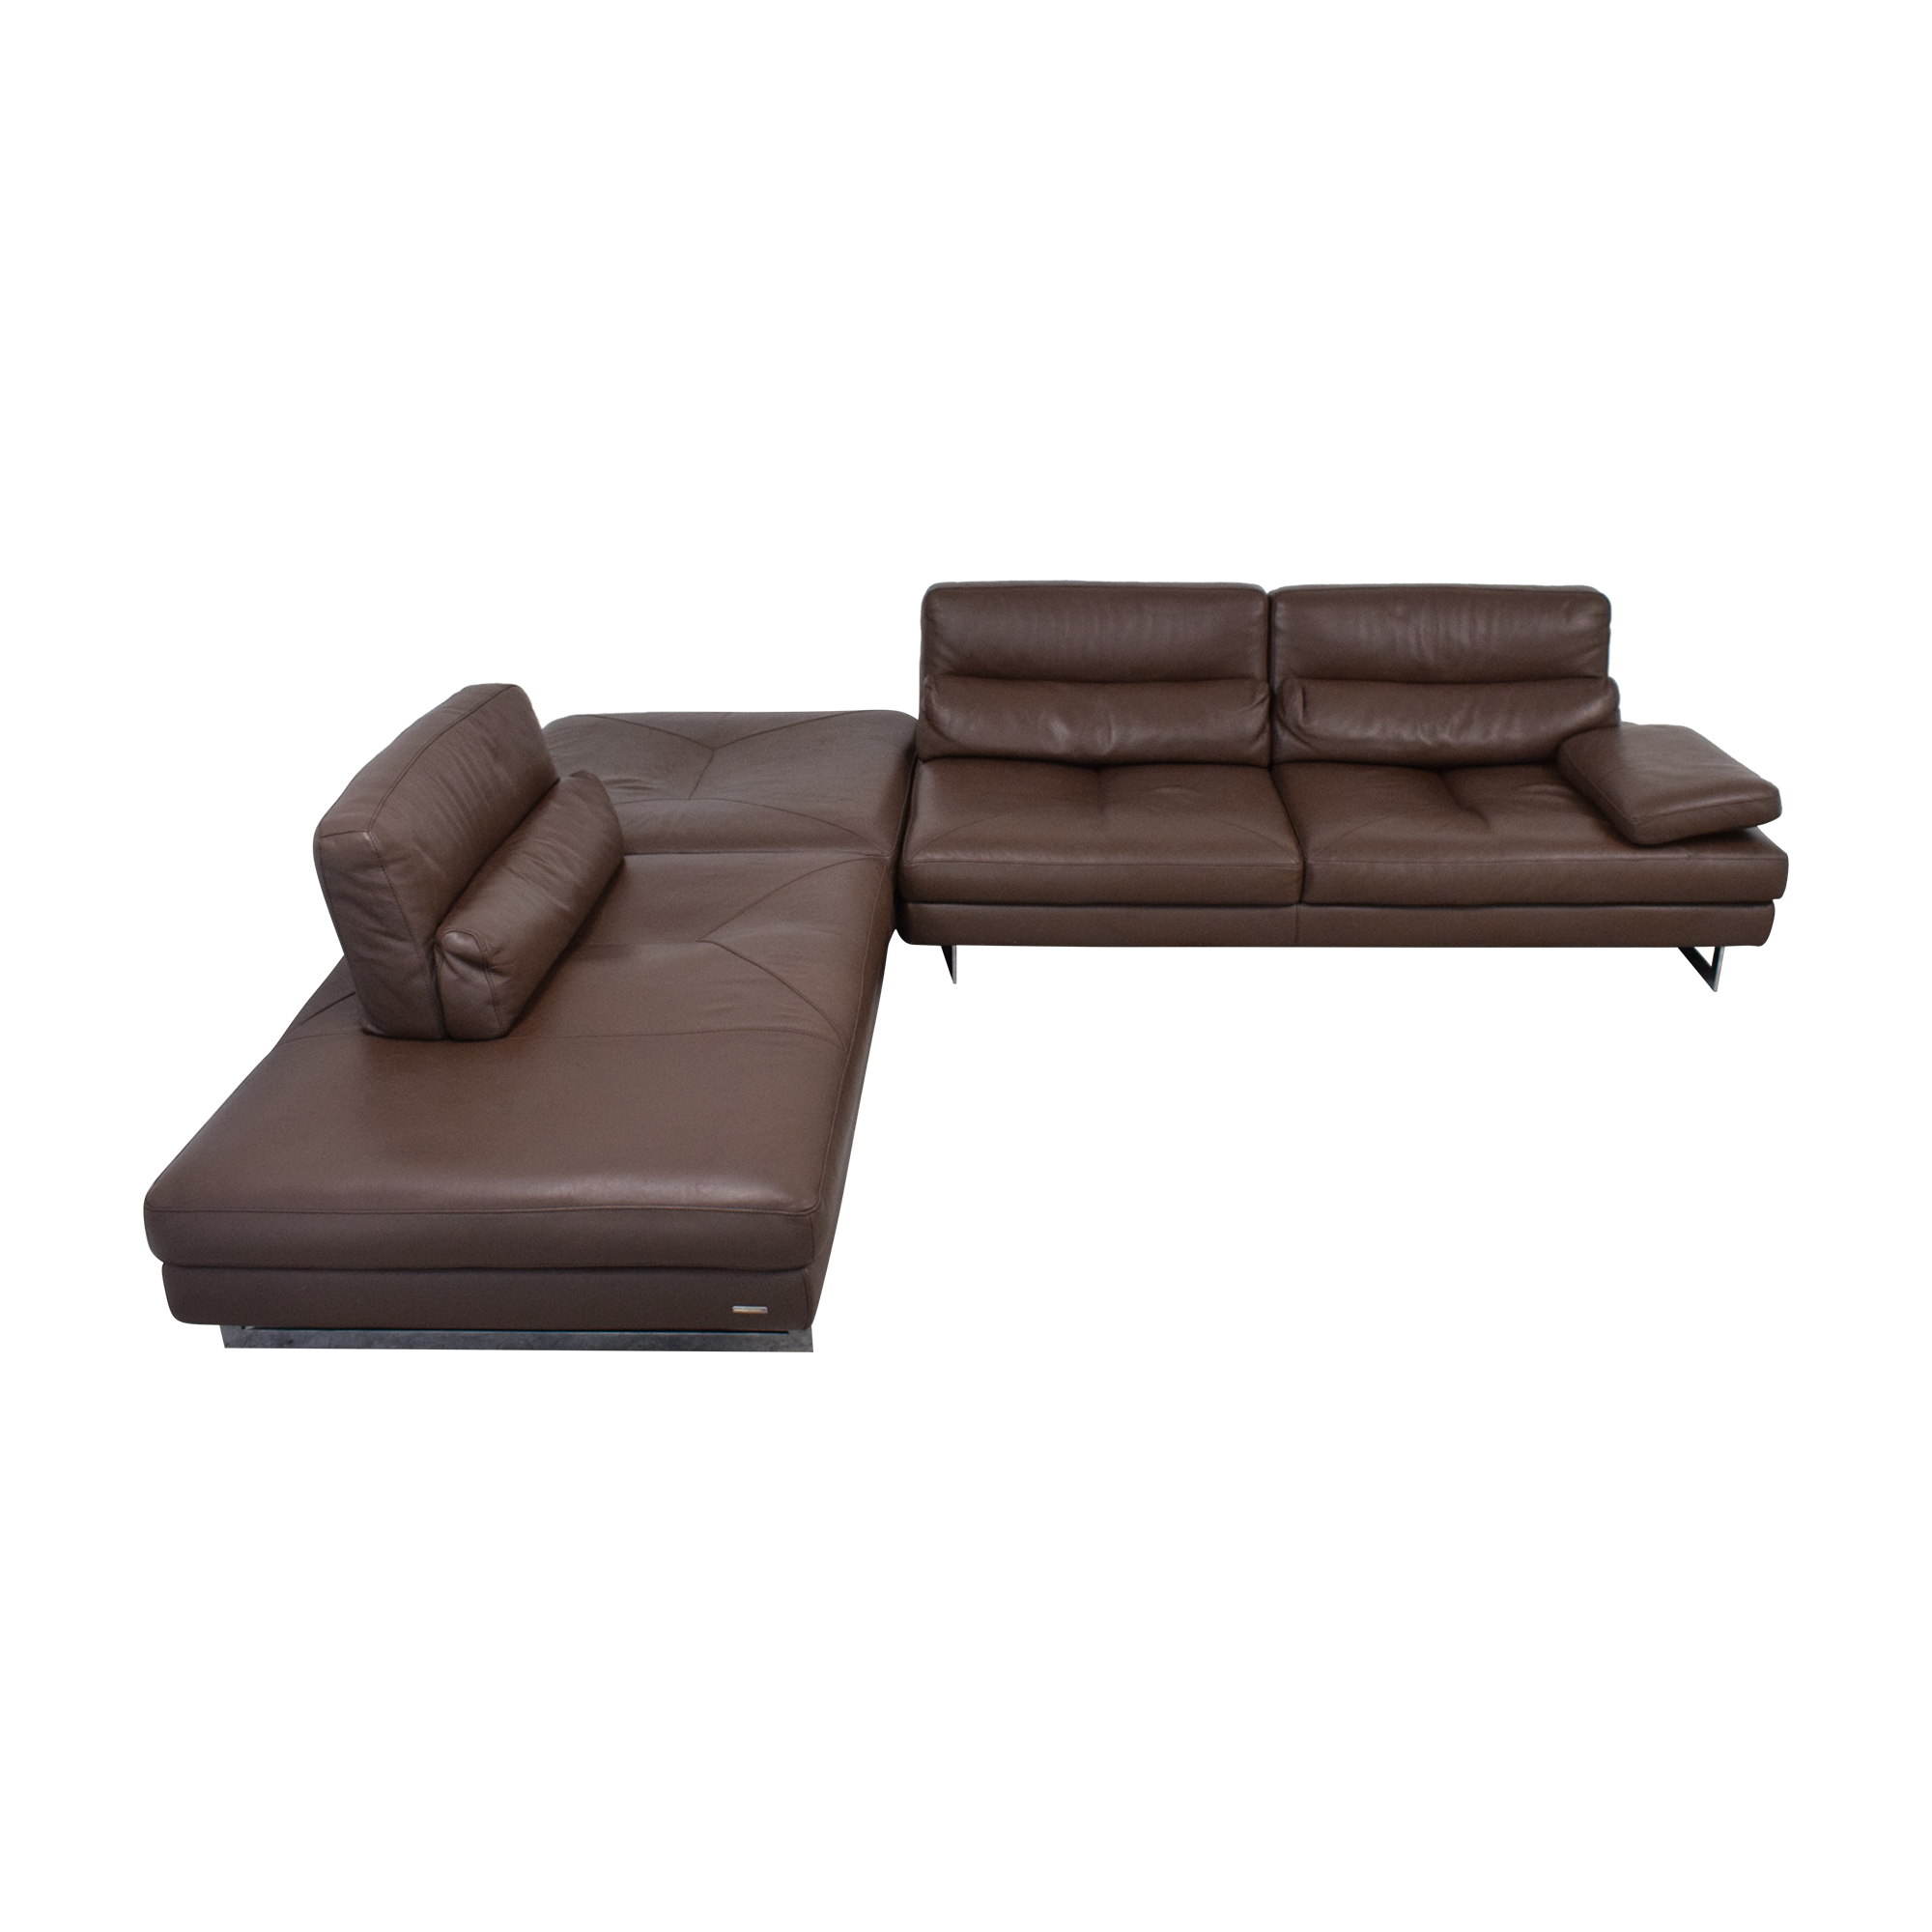 roche bobois chaise sectional sofa used